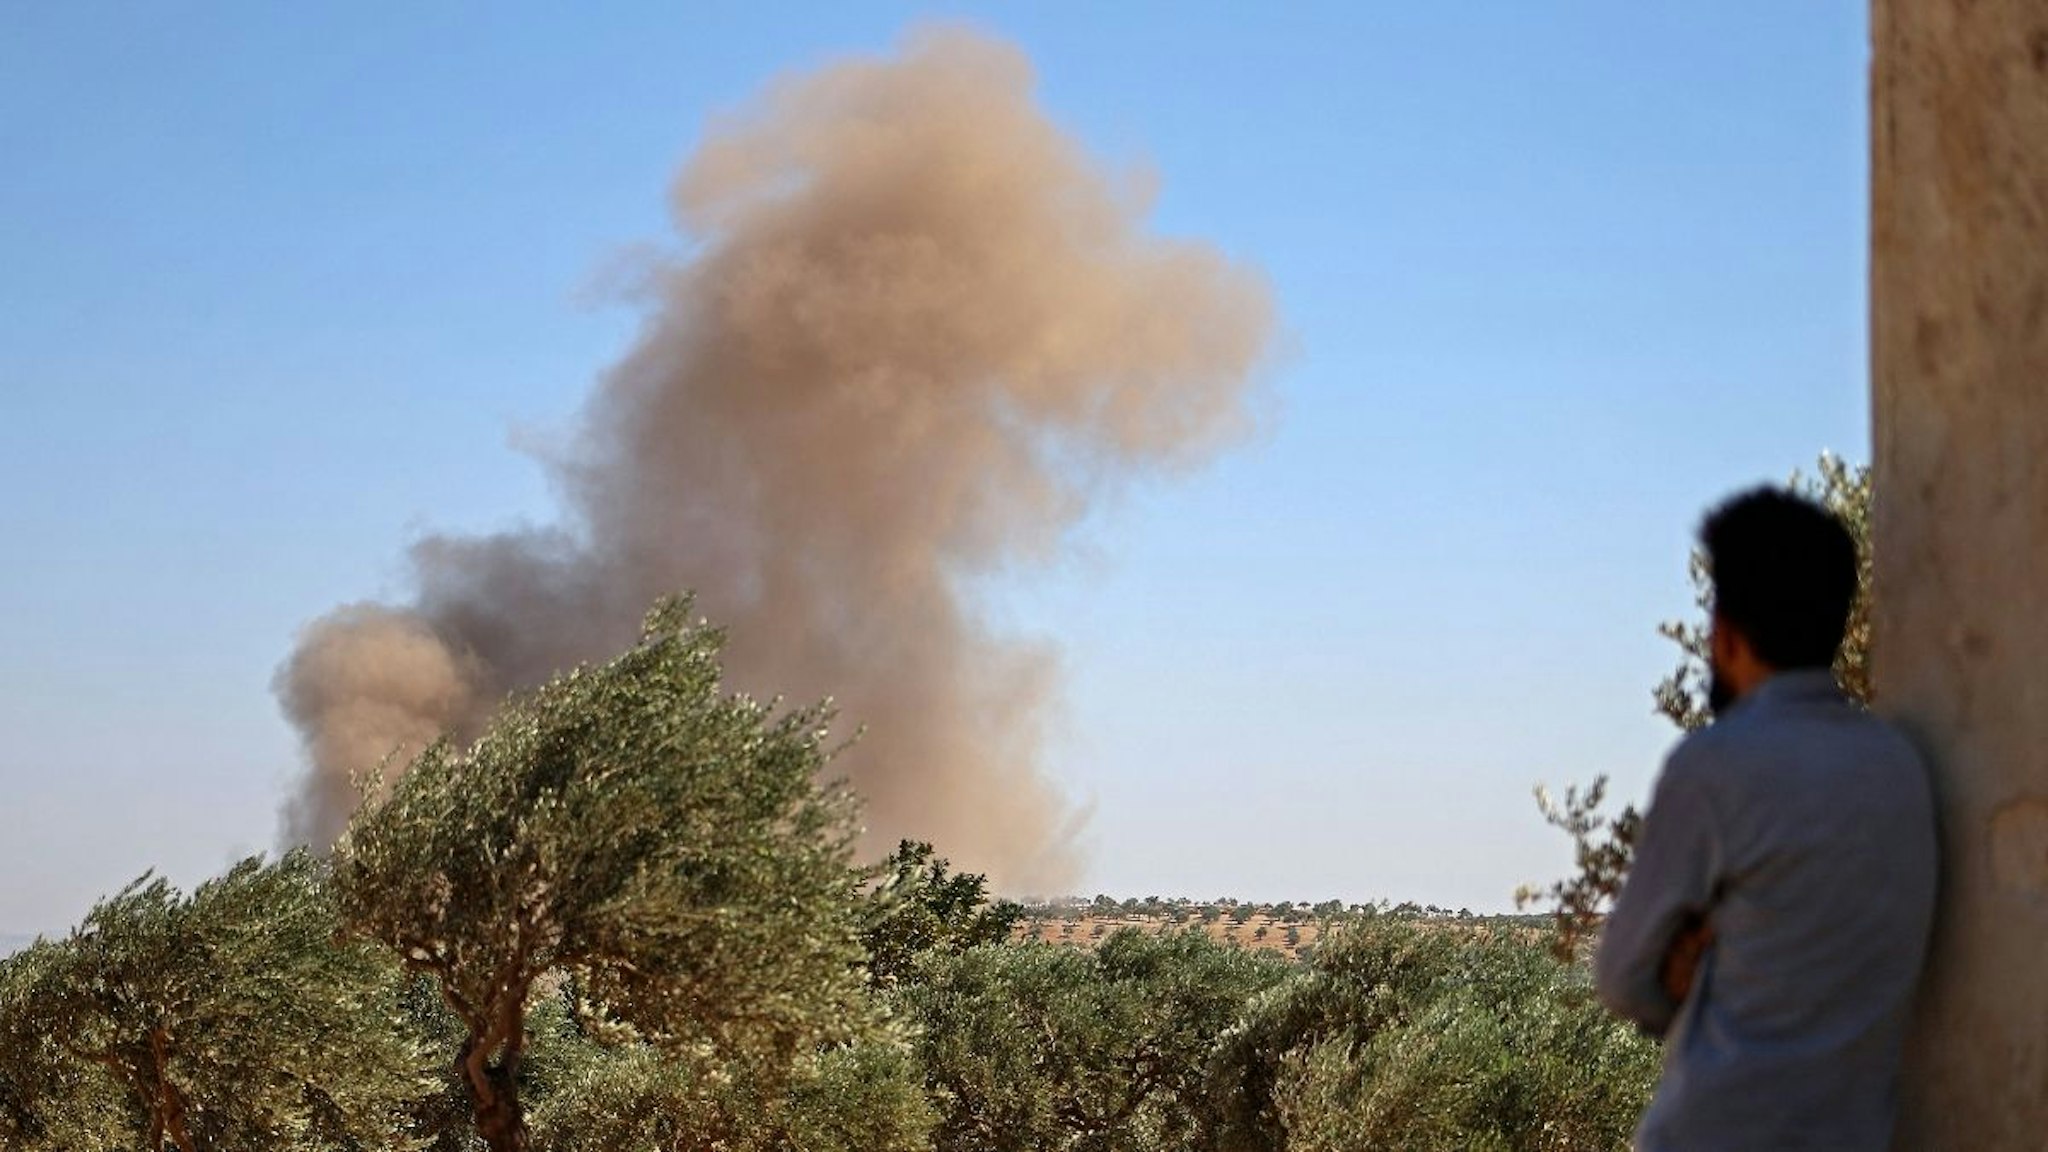 A Syrian man looks on as a plume of smoke rises in the distance, caused by reported airstrikes by pro-regime forces, north of the rebel-held city of Idlib, on August 20, 2021.